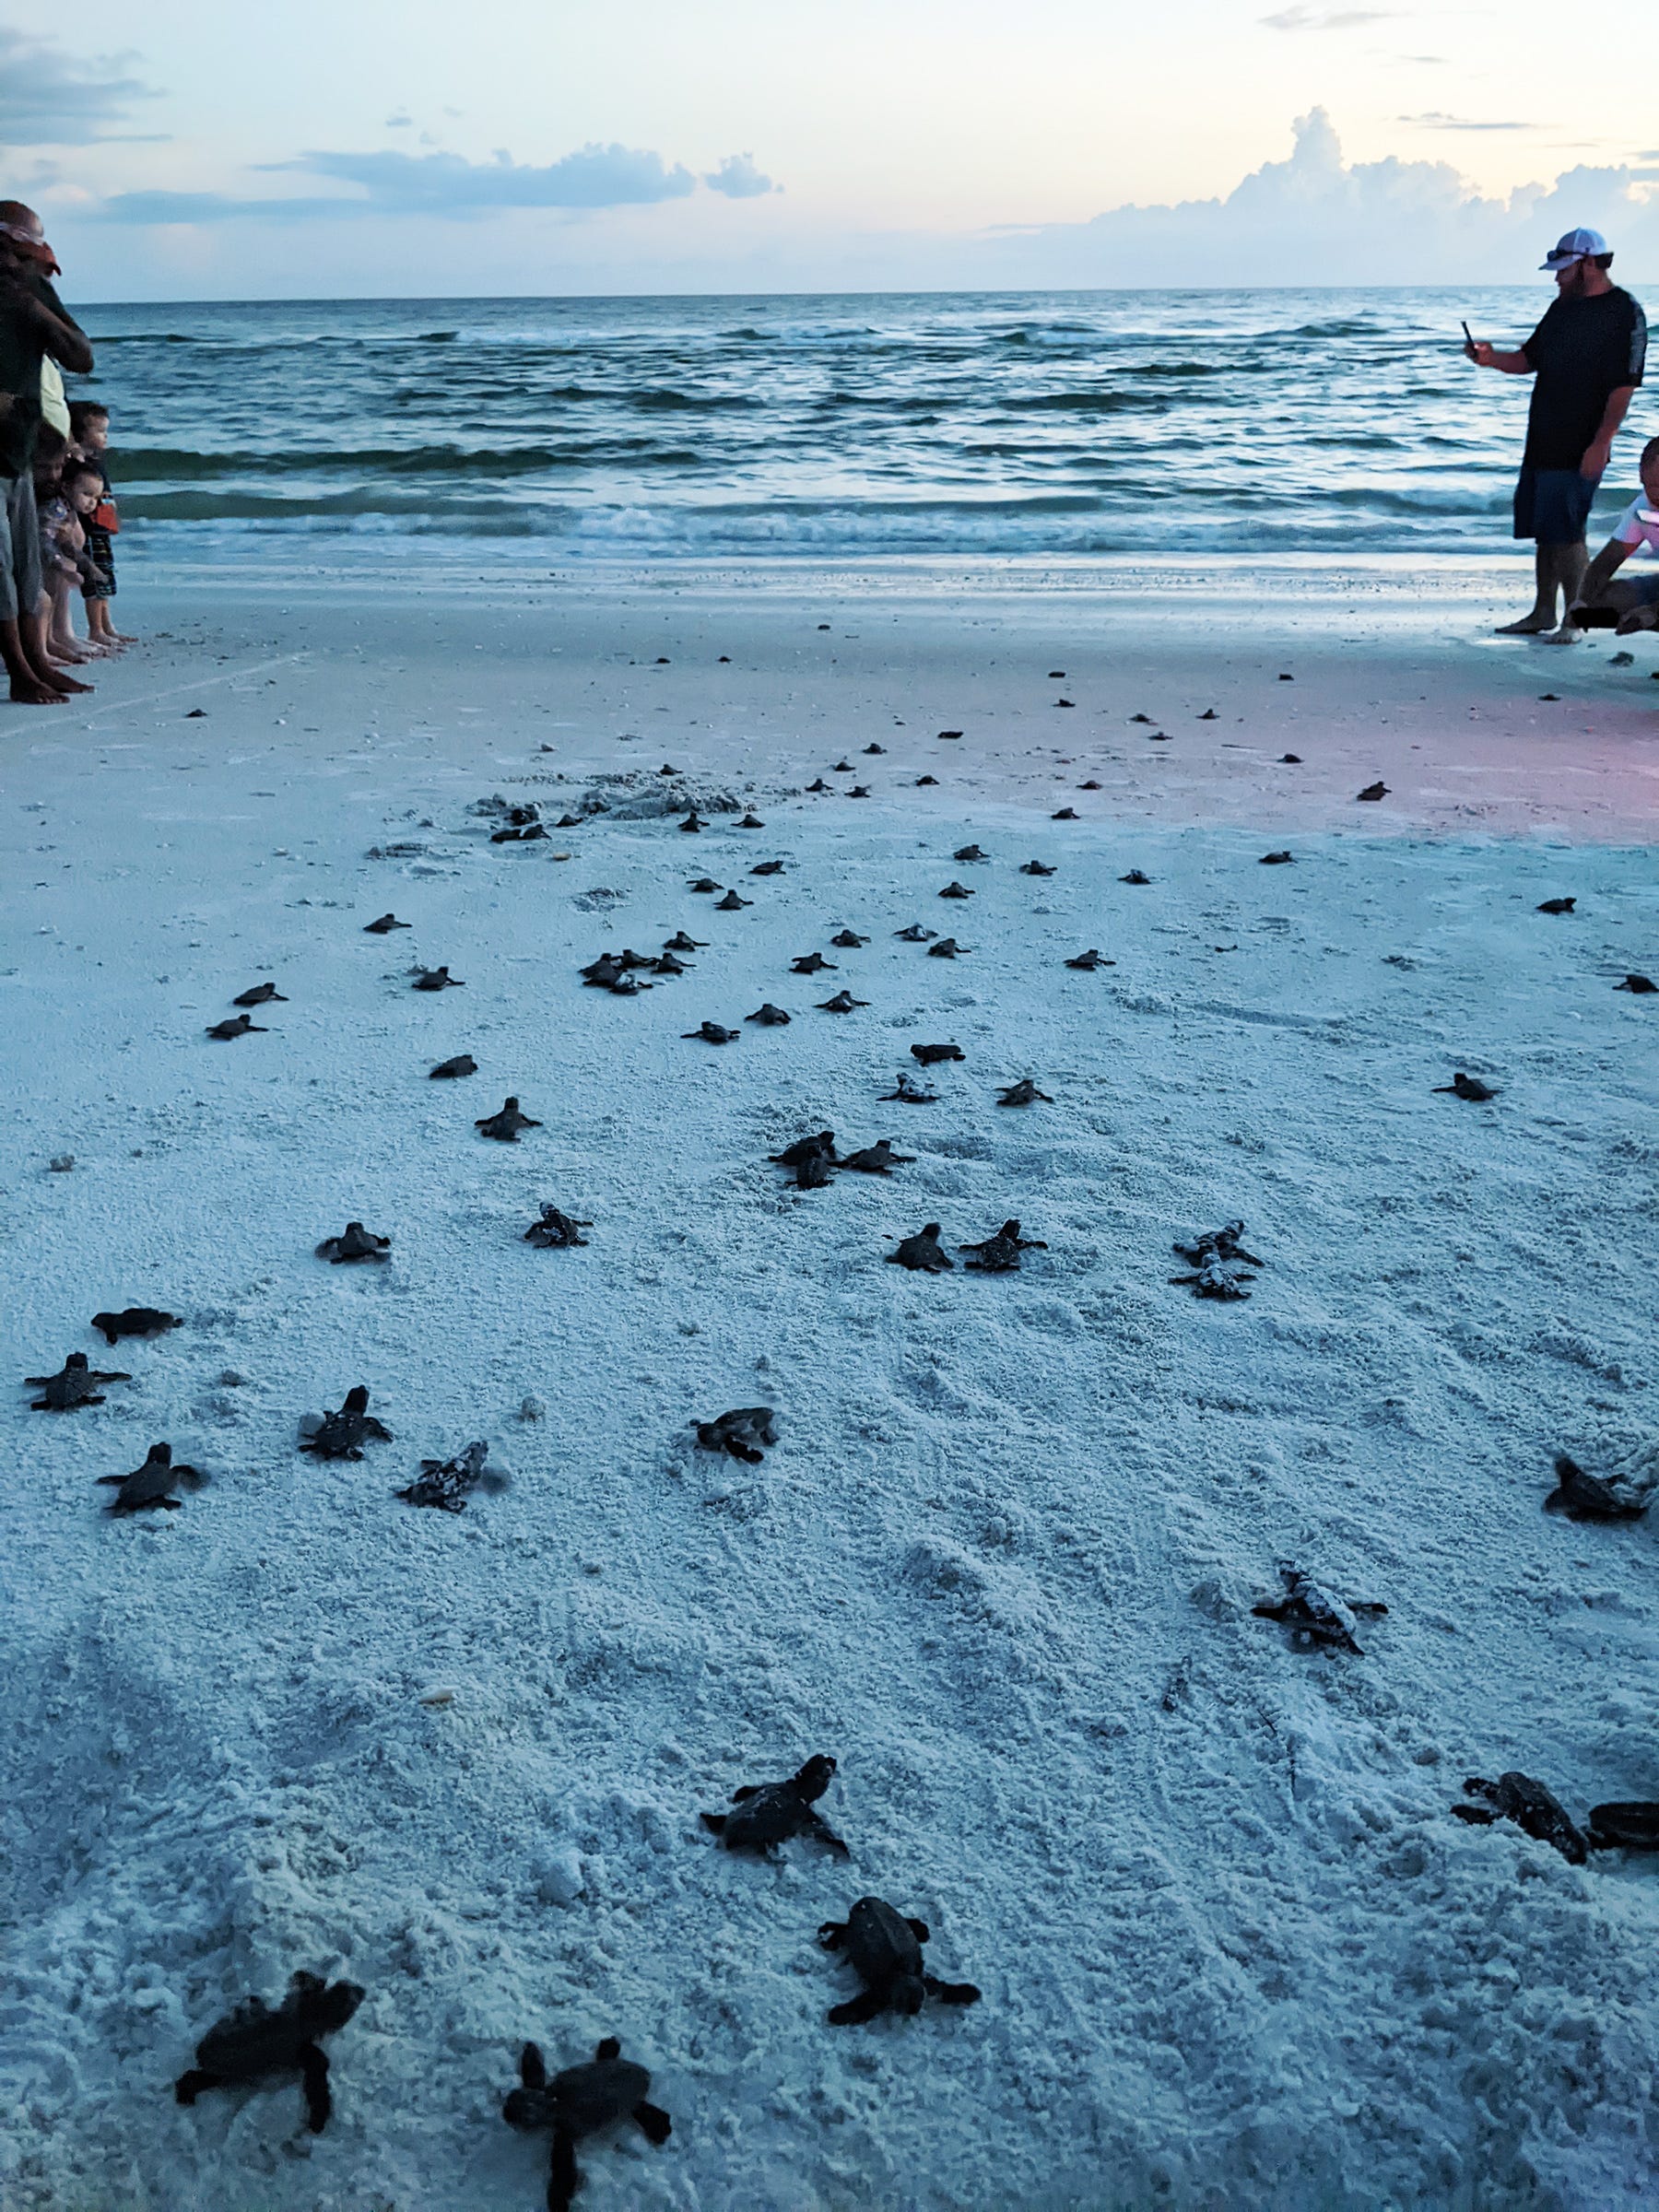 Hatchlings that are rescued are released when it gets dark so they have a better chance to avoid predators. This is a release of rescued loggerhead turtles on Marco Island this season.